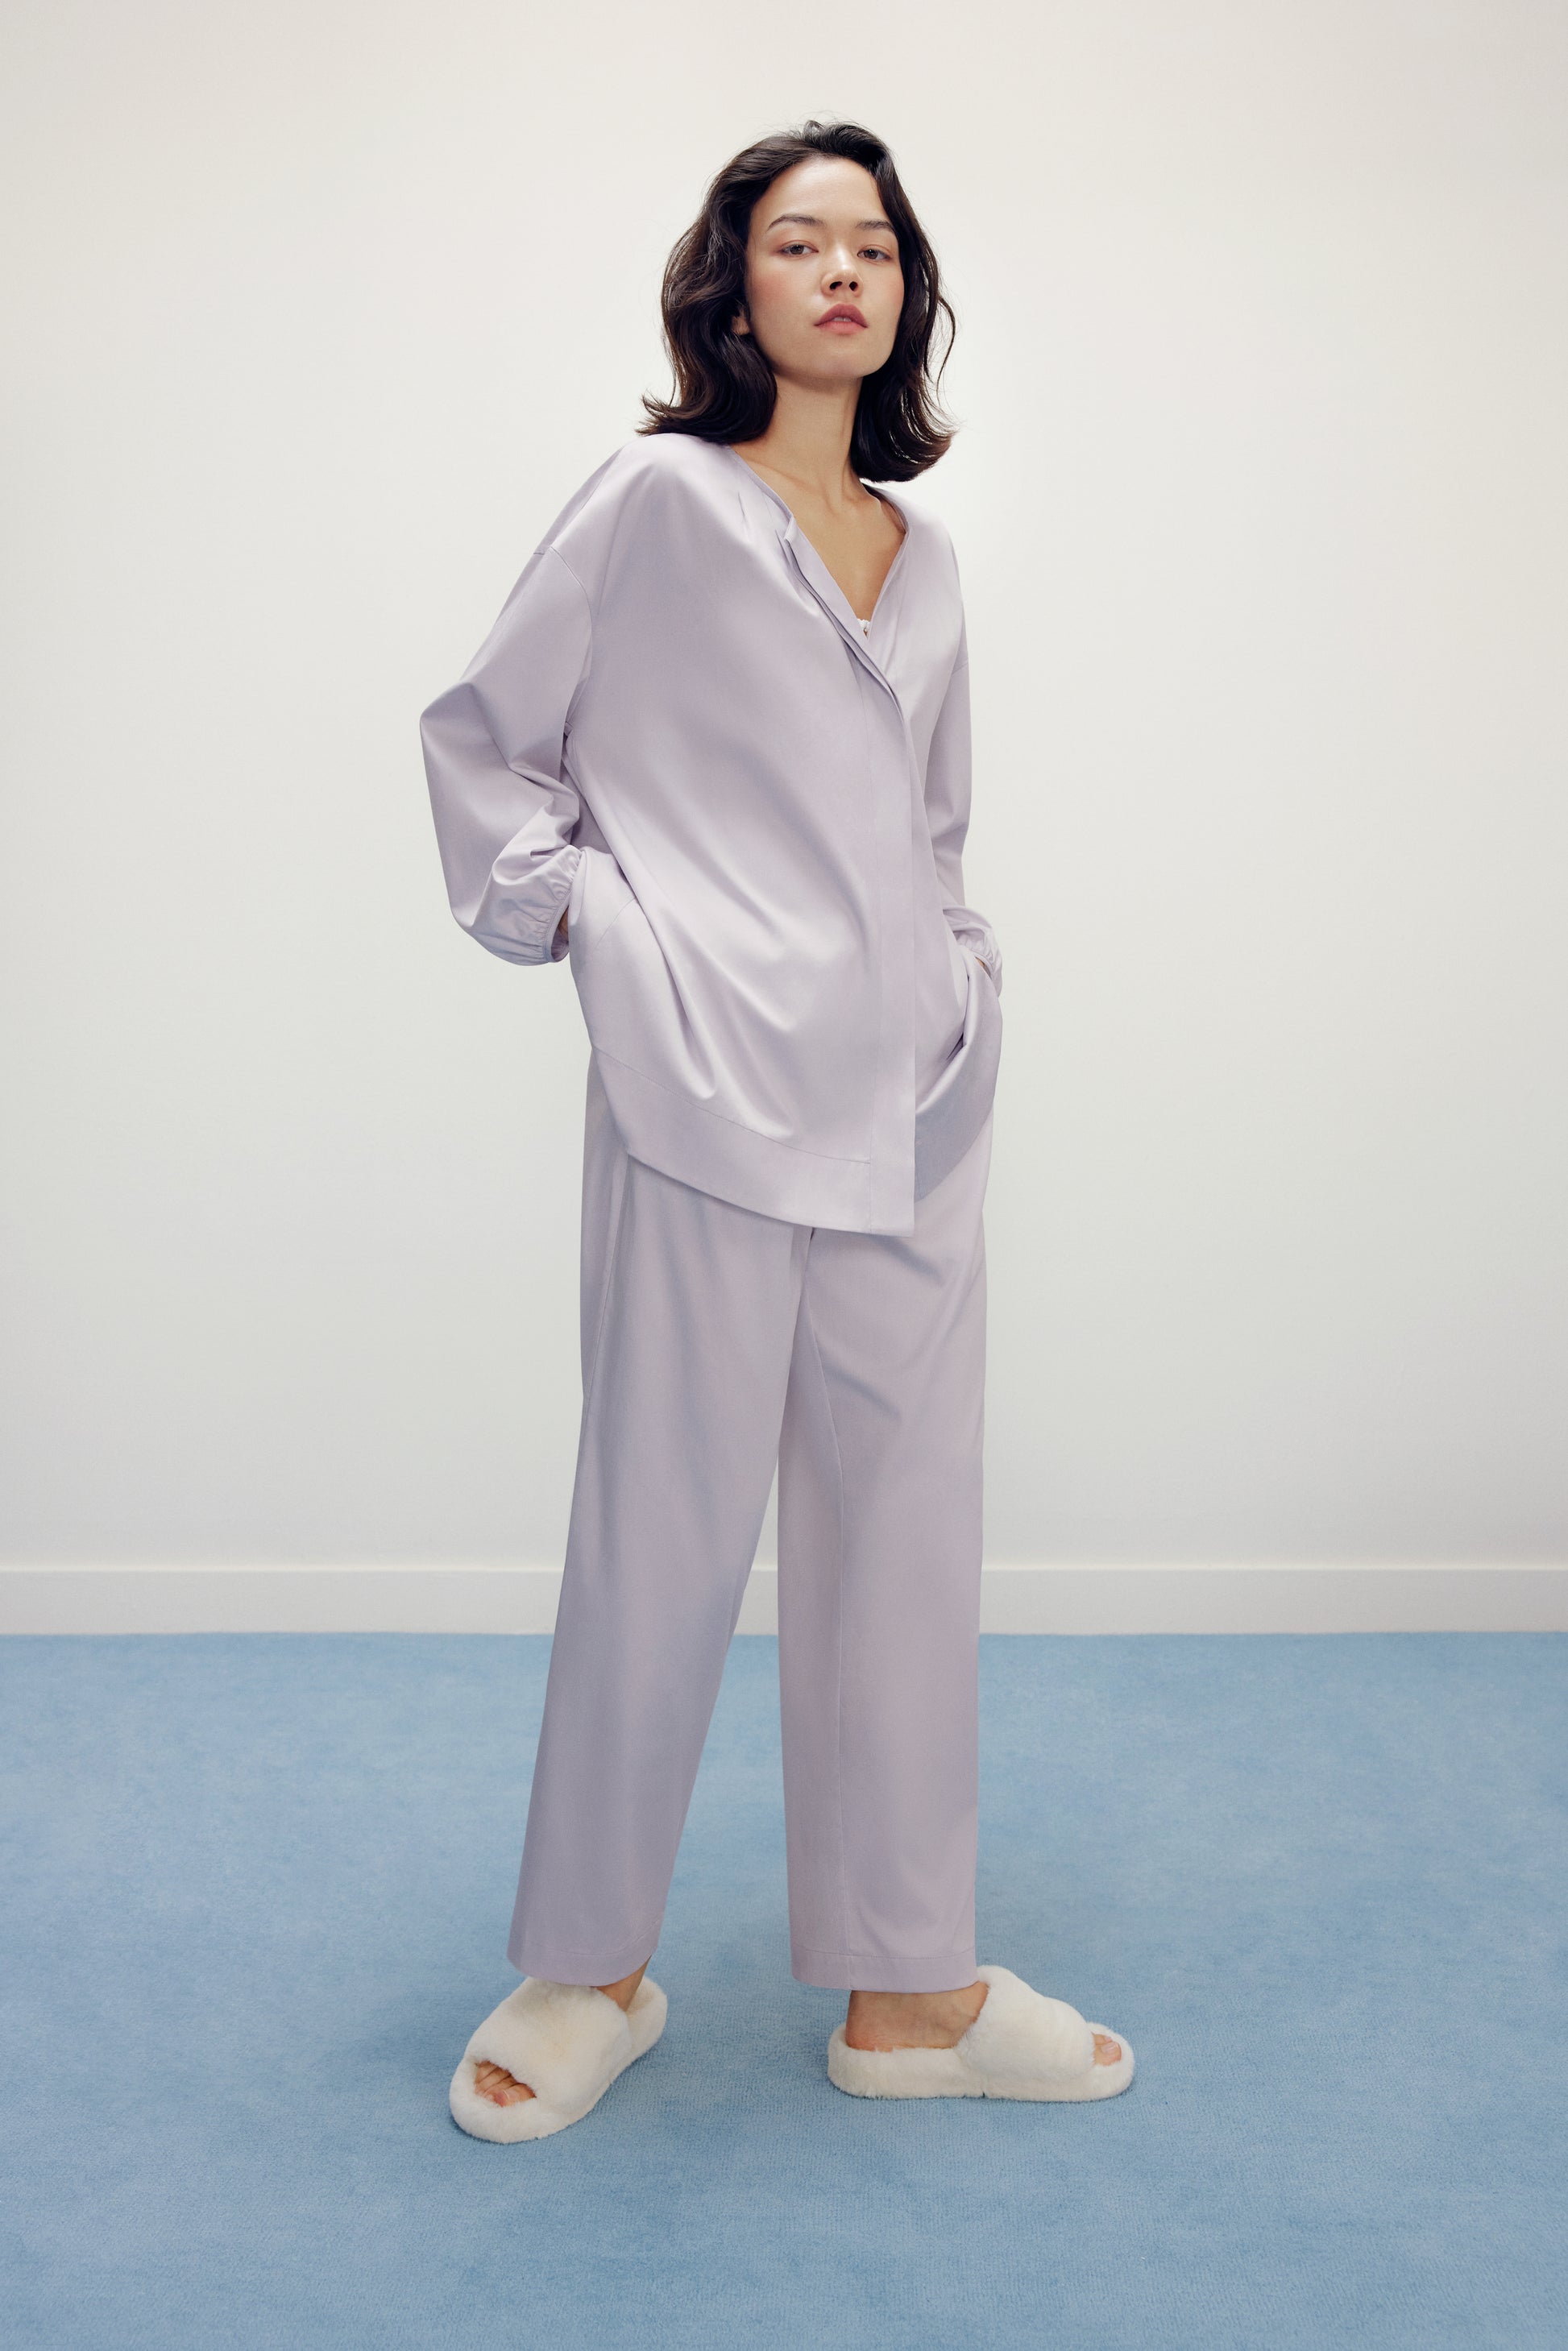 a woman wearing a purple pajama sets and white slippers 